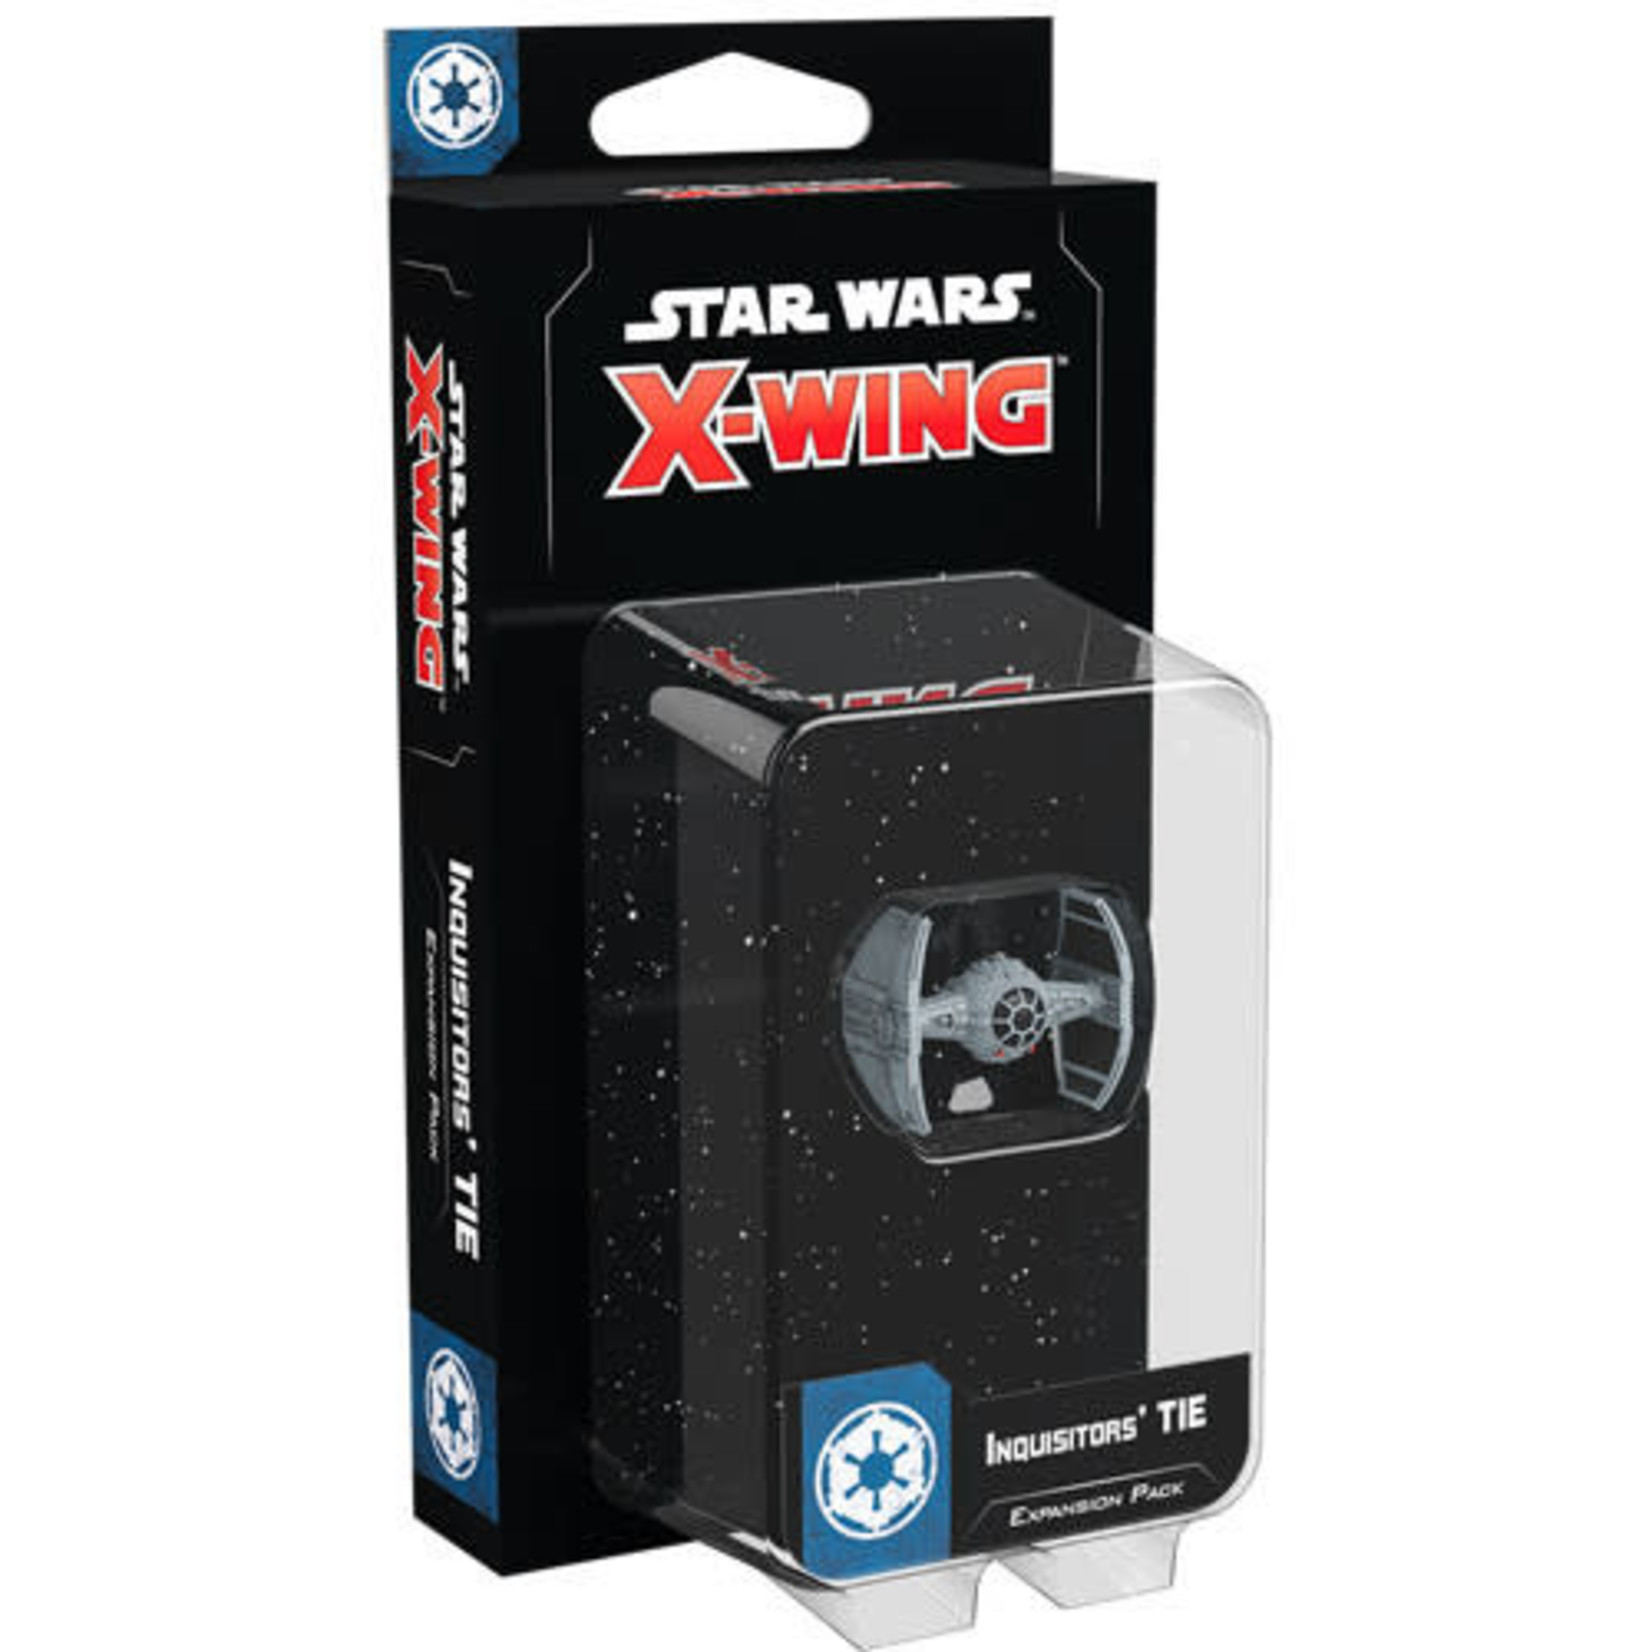 Star Wars X-Wing 2e: Inquistors TIE Expansion Pack